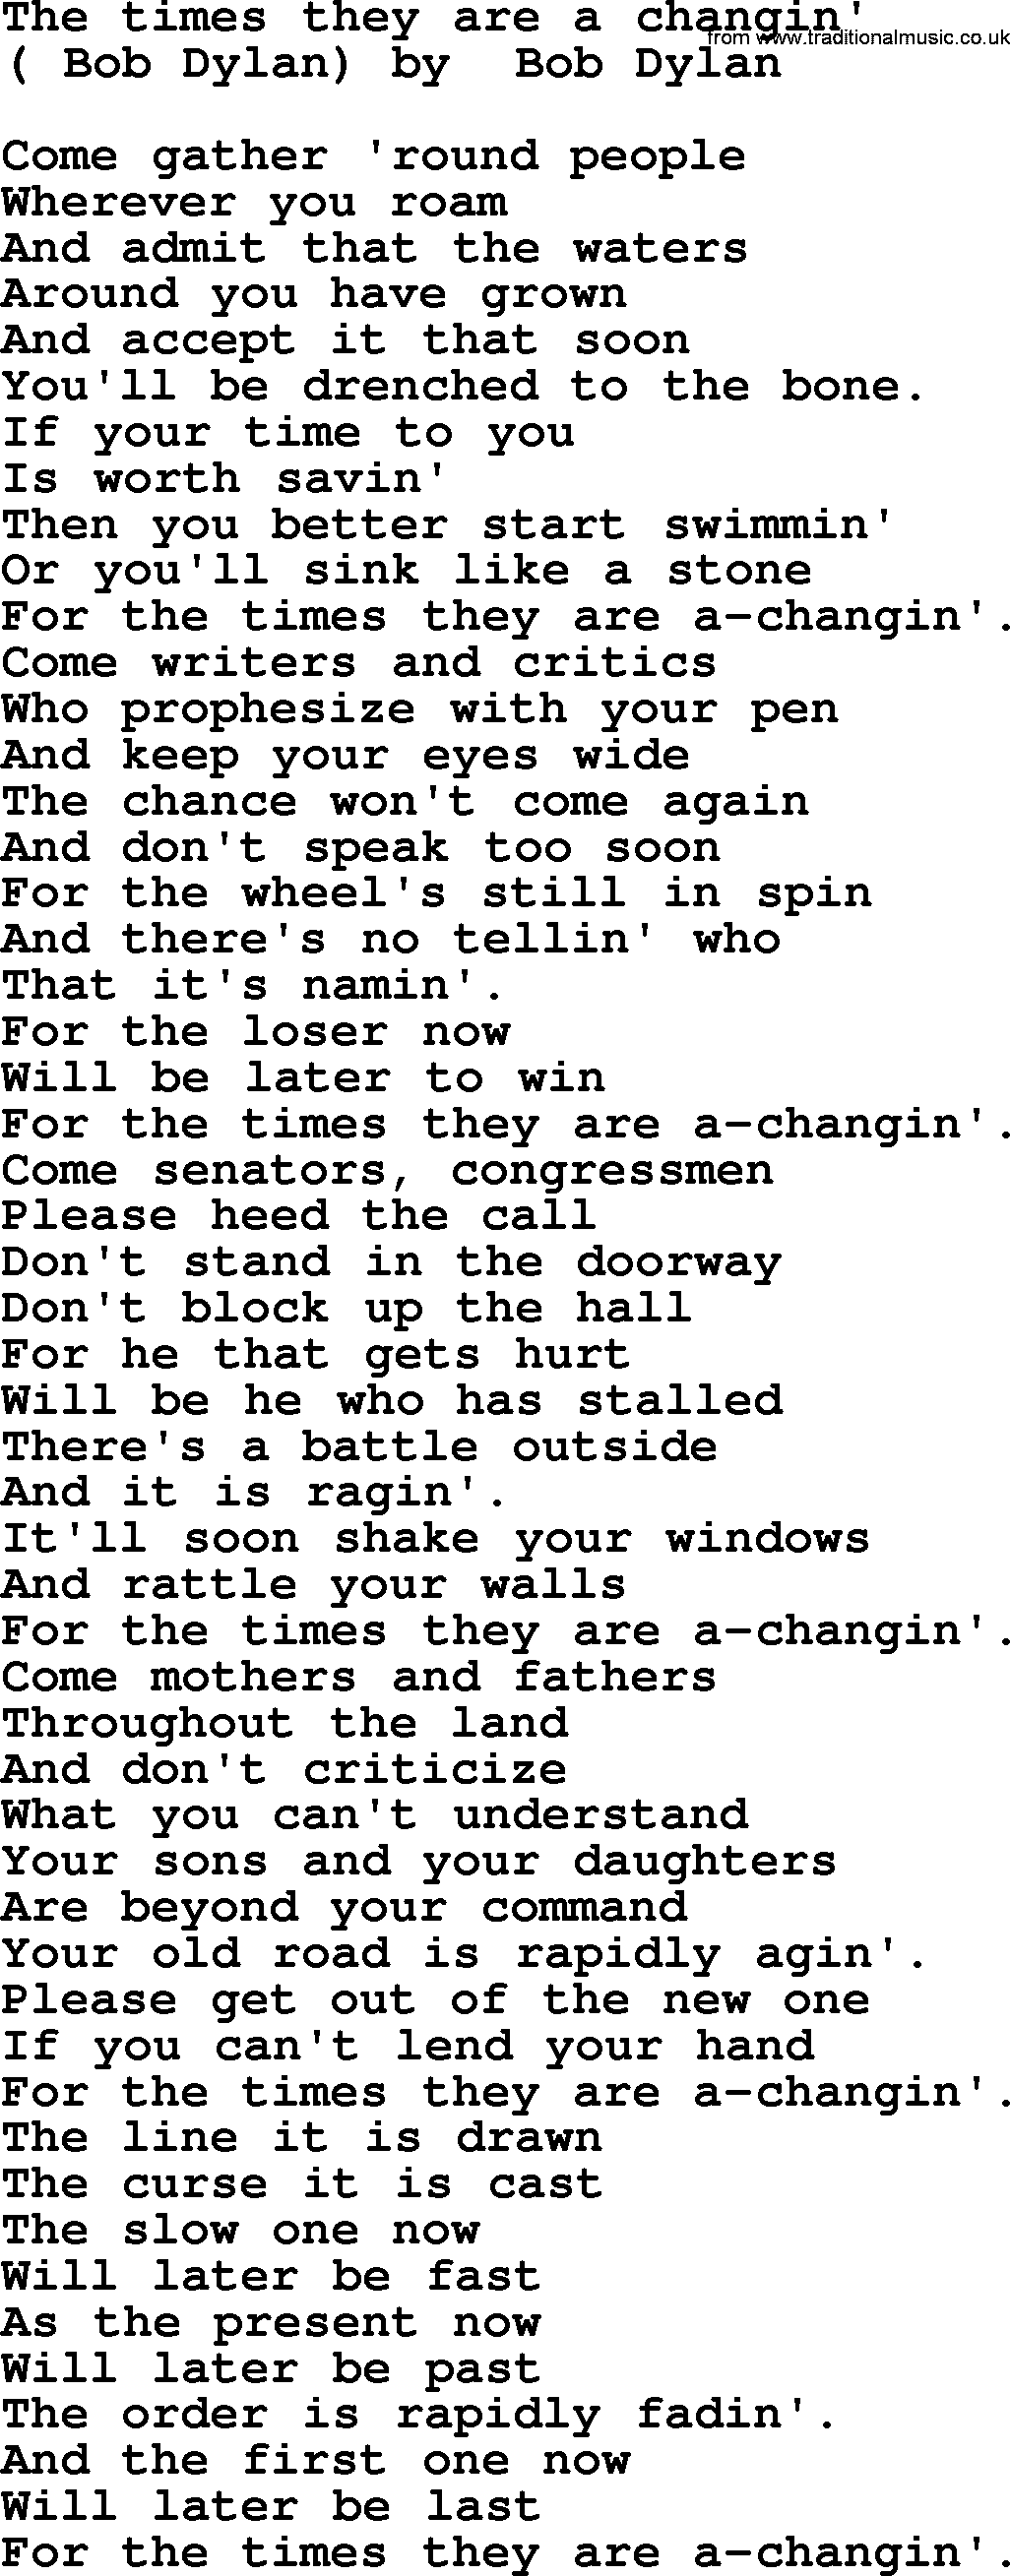 Bruce Springsteen song: The Times They Are A Changin' lyrics